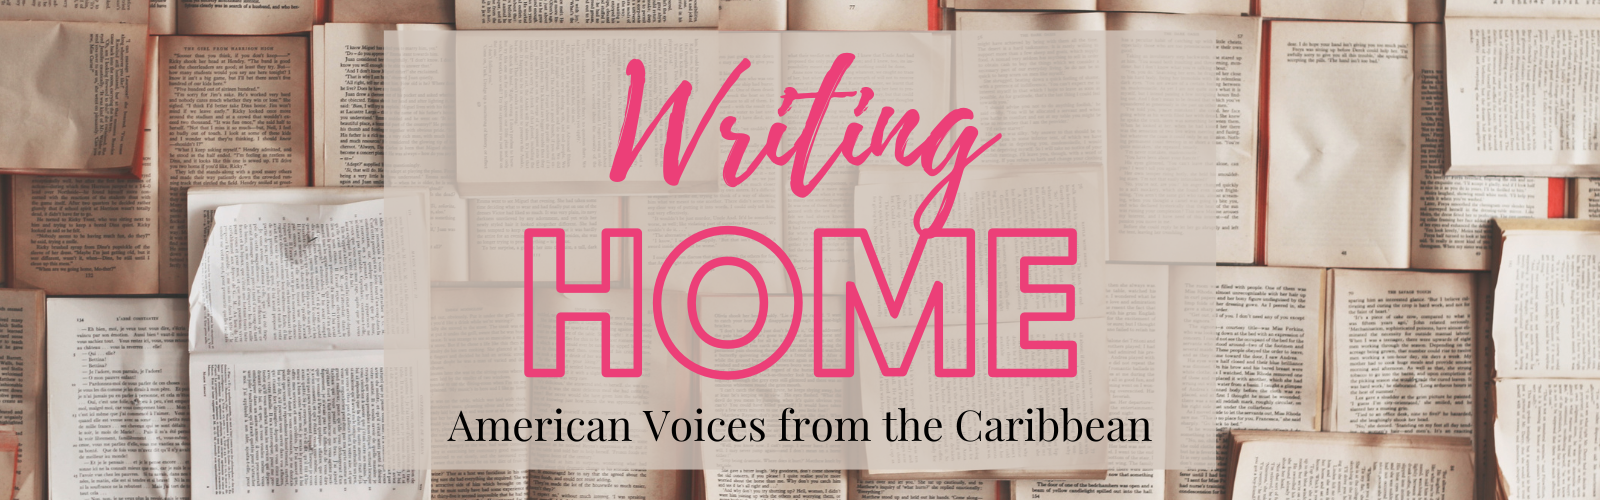 Writing Home: American Voices from the Caribbean 